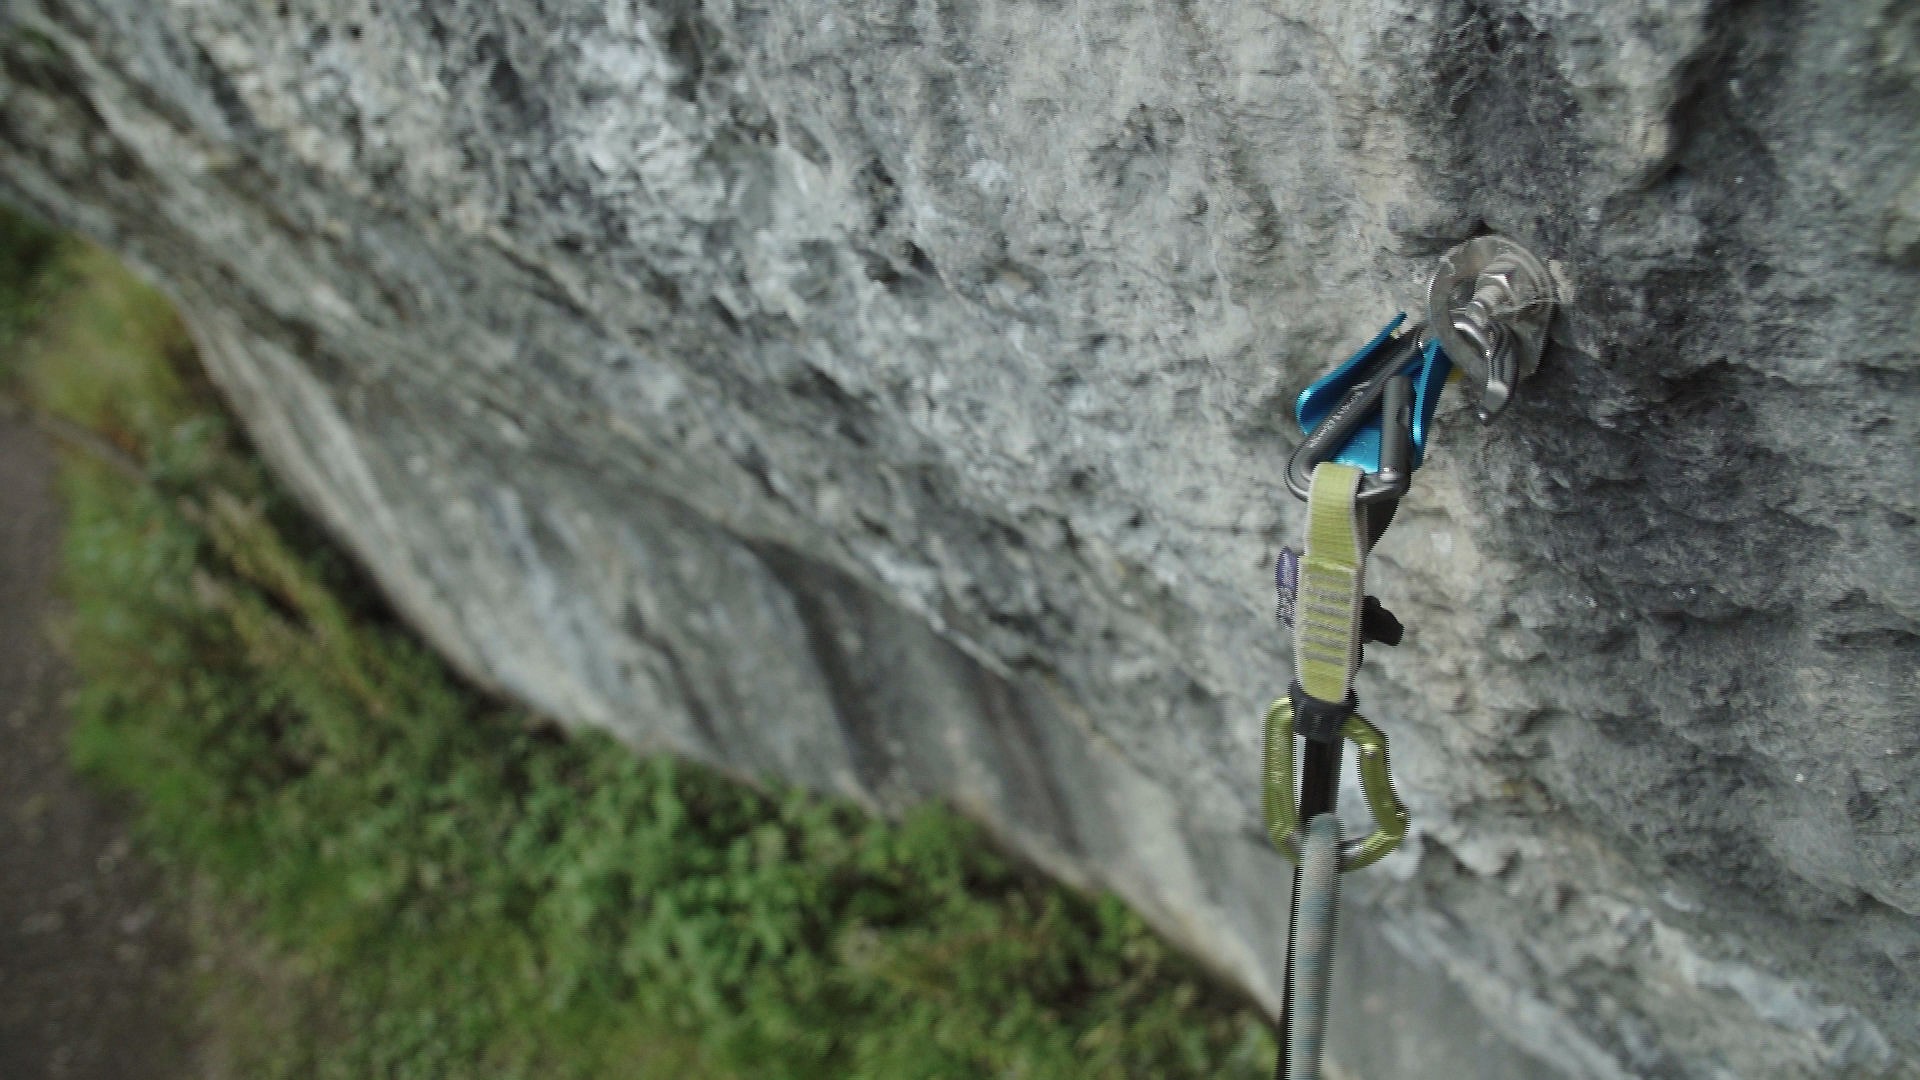 Clipping a quickdraw into a bolt  © UKC Gear